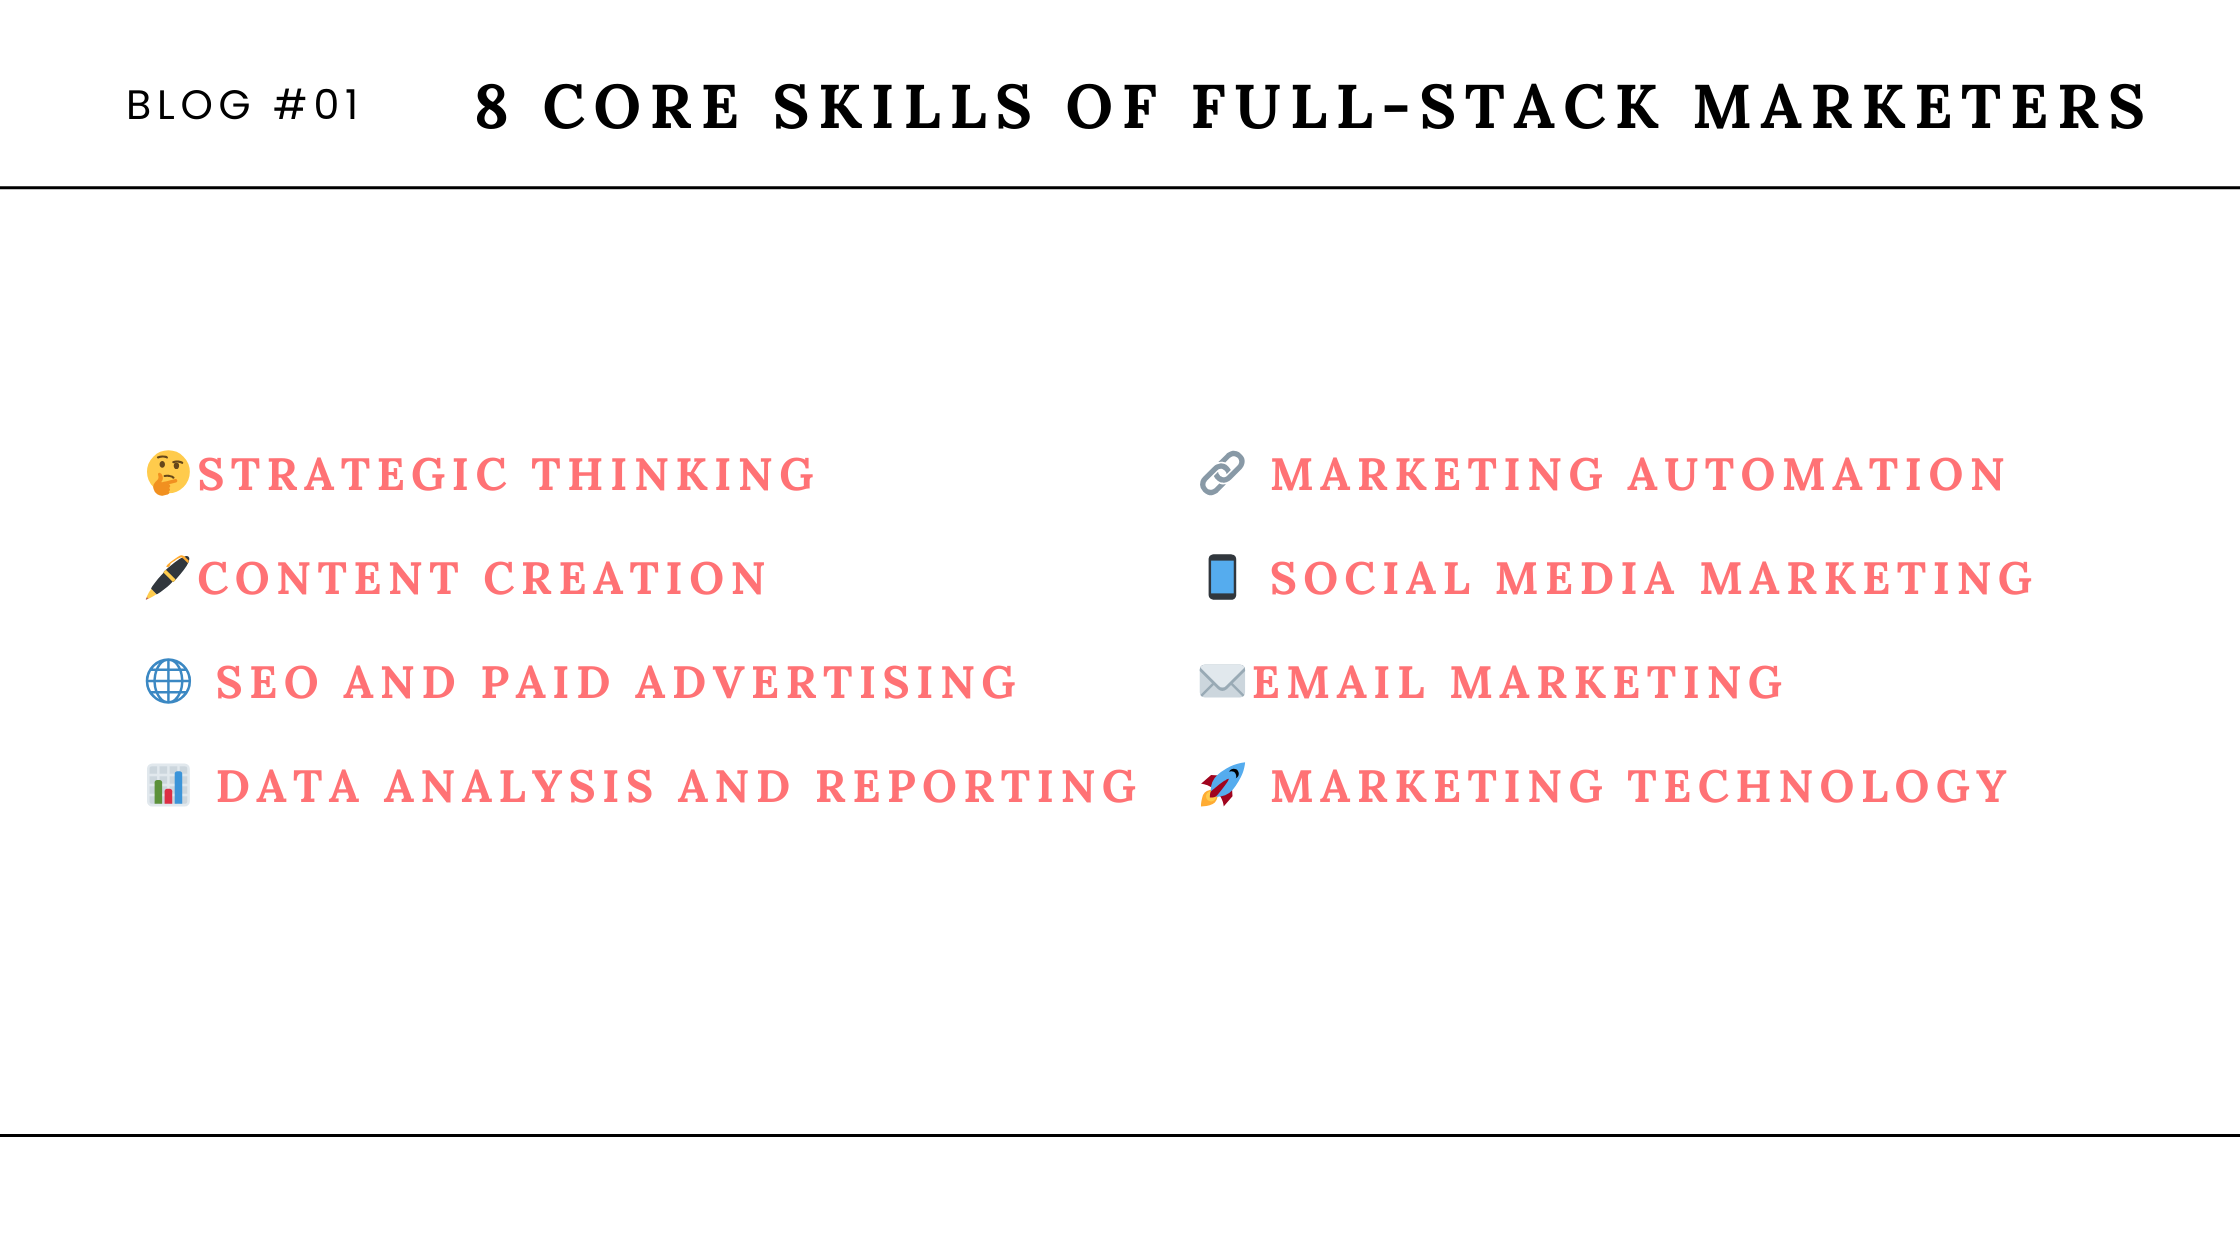 8 core skills of full-stack marketers